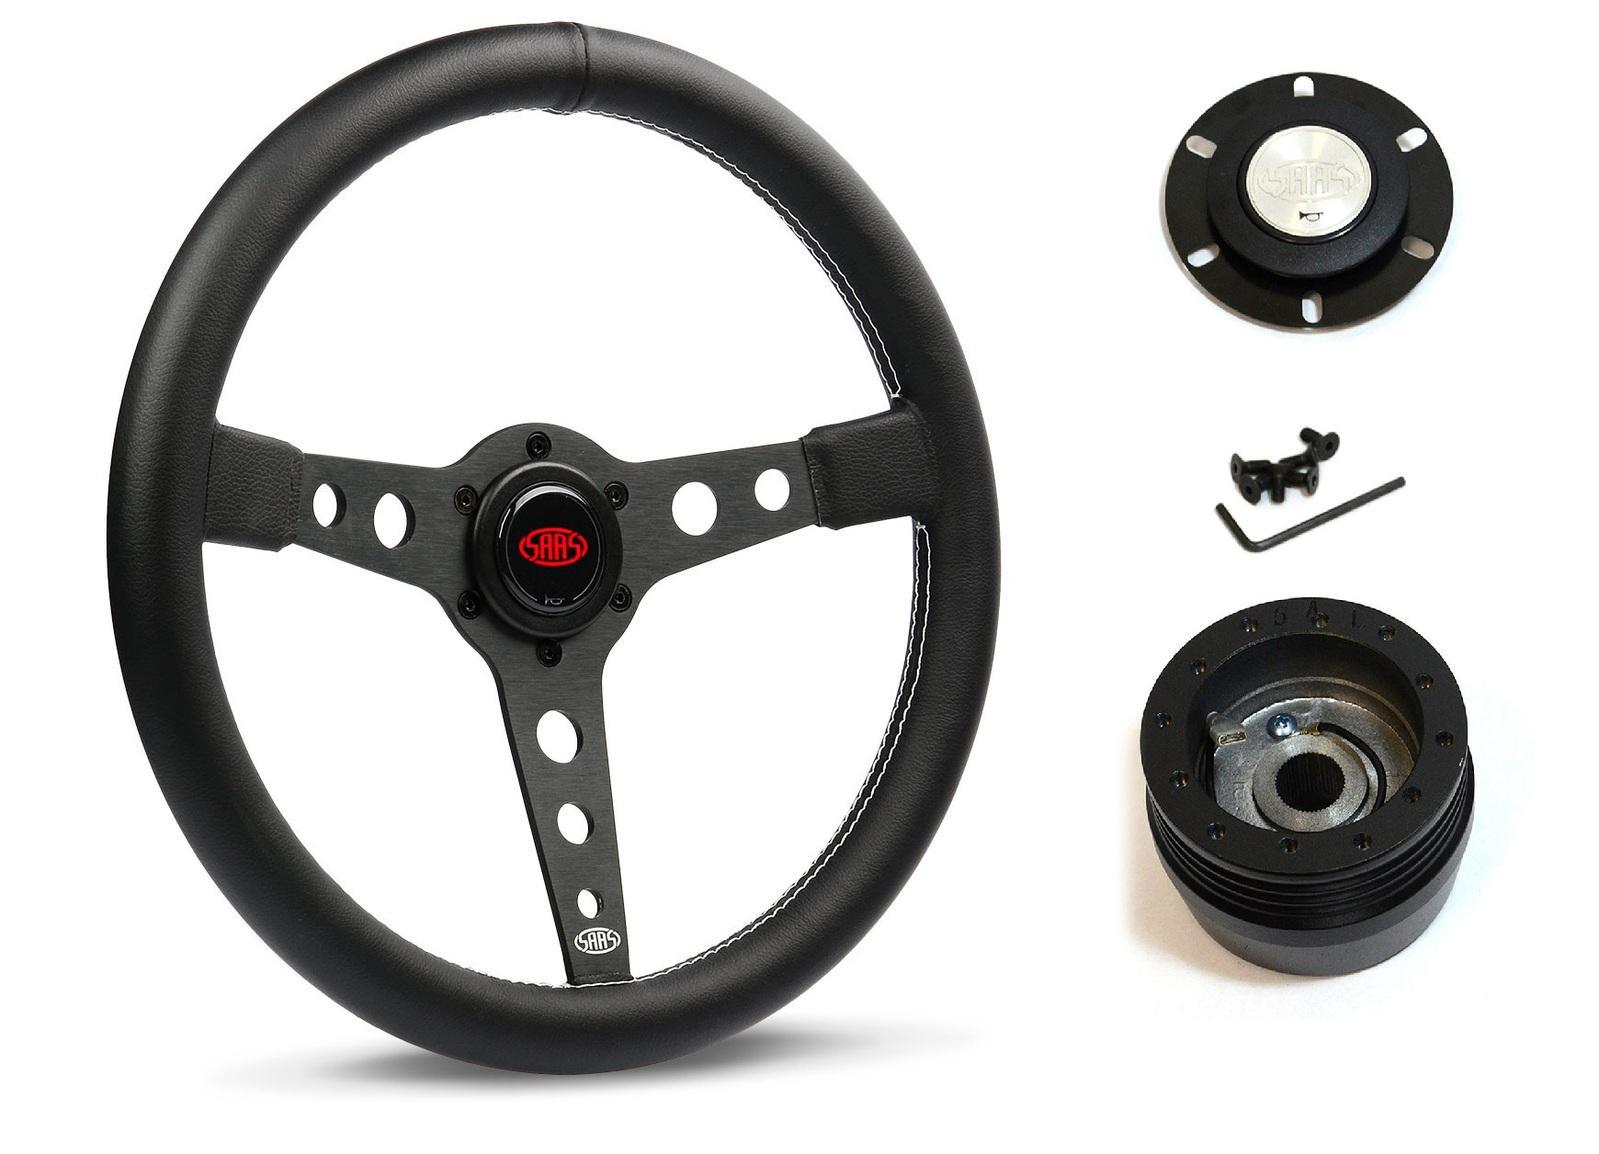 SAAS Steering Wheel Leatherette 14" ADR Retro Black Spoke White Stitching SW616OS-WS and SAAS boss kit for Datsun 280ZX 1979-1984